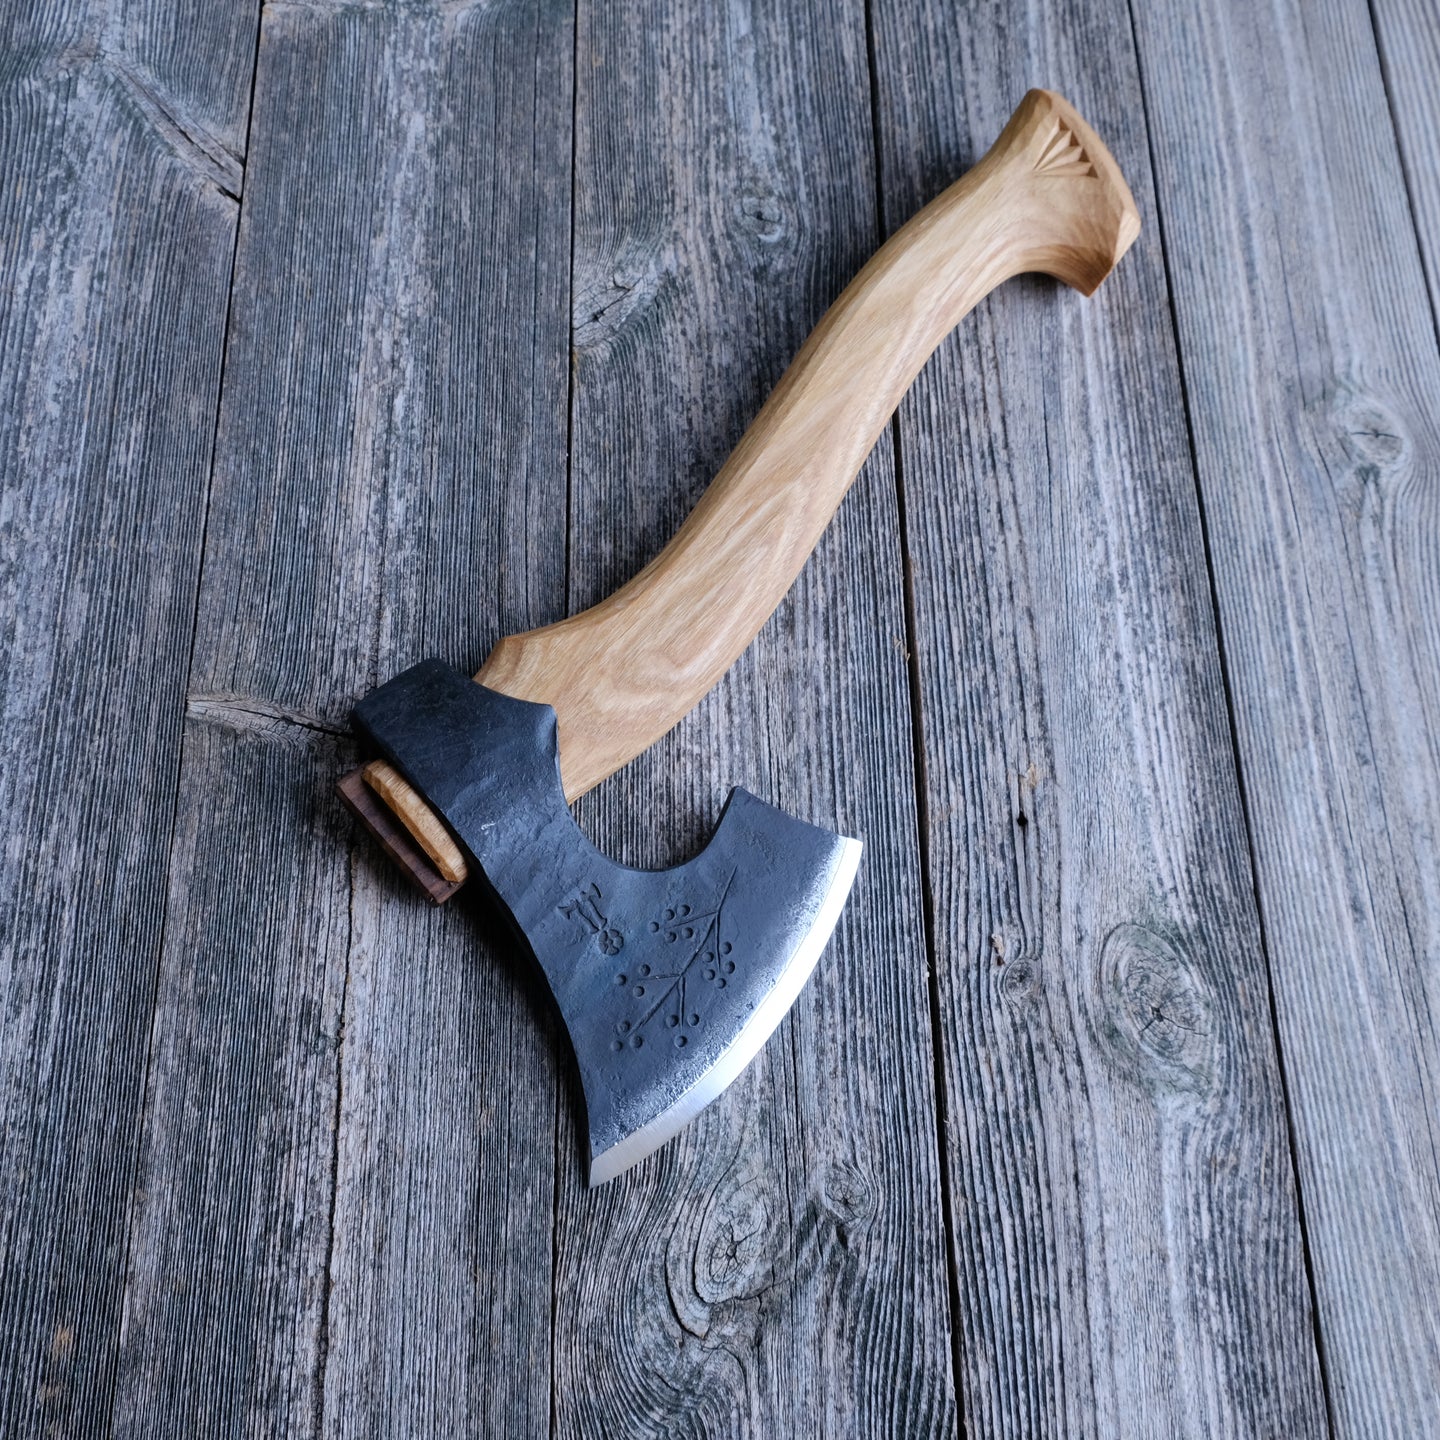 Soulwood Carving Axe #1 (Pre-Order) – Soulwood Creations